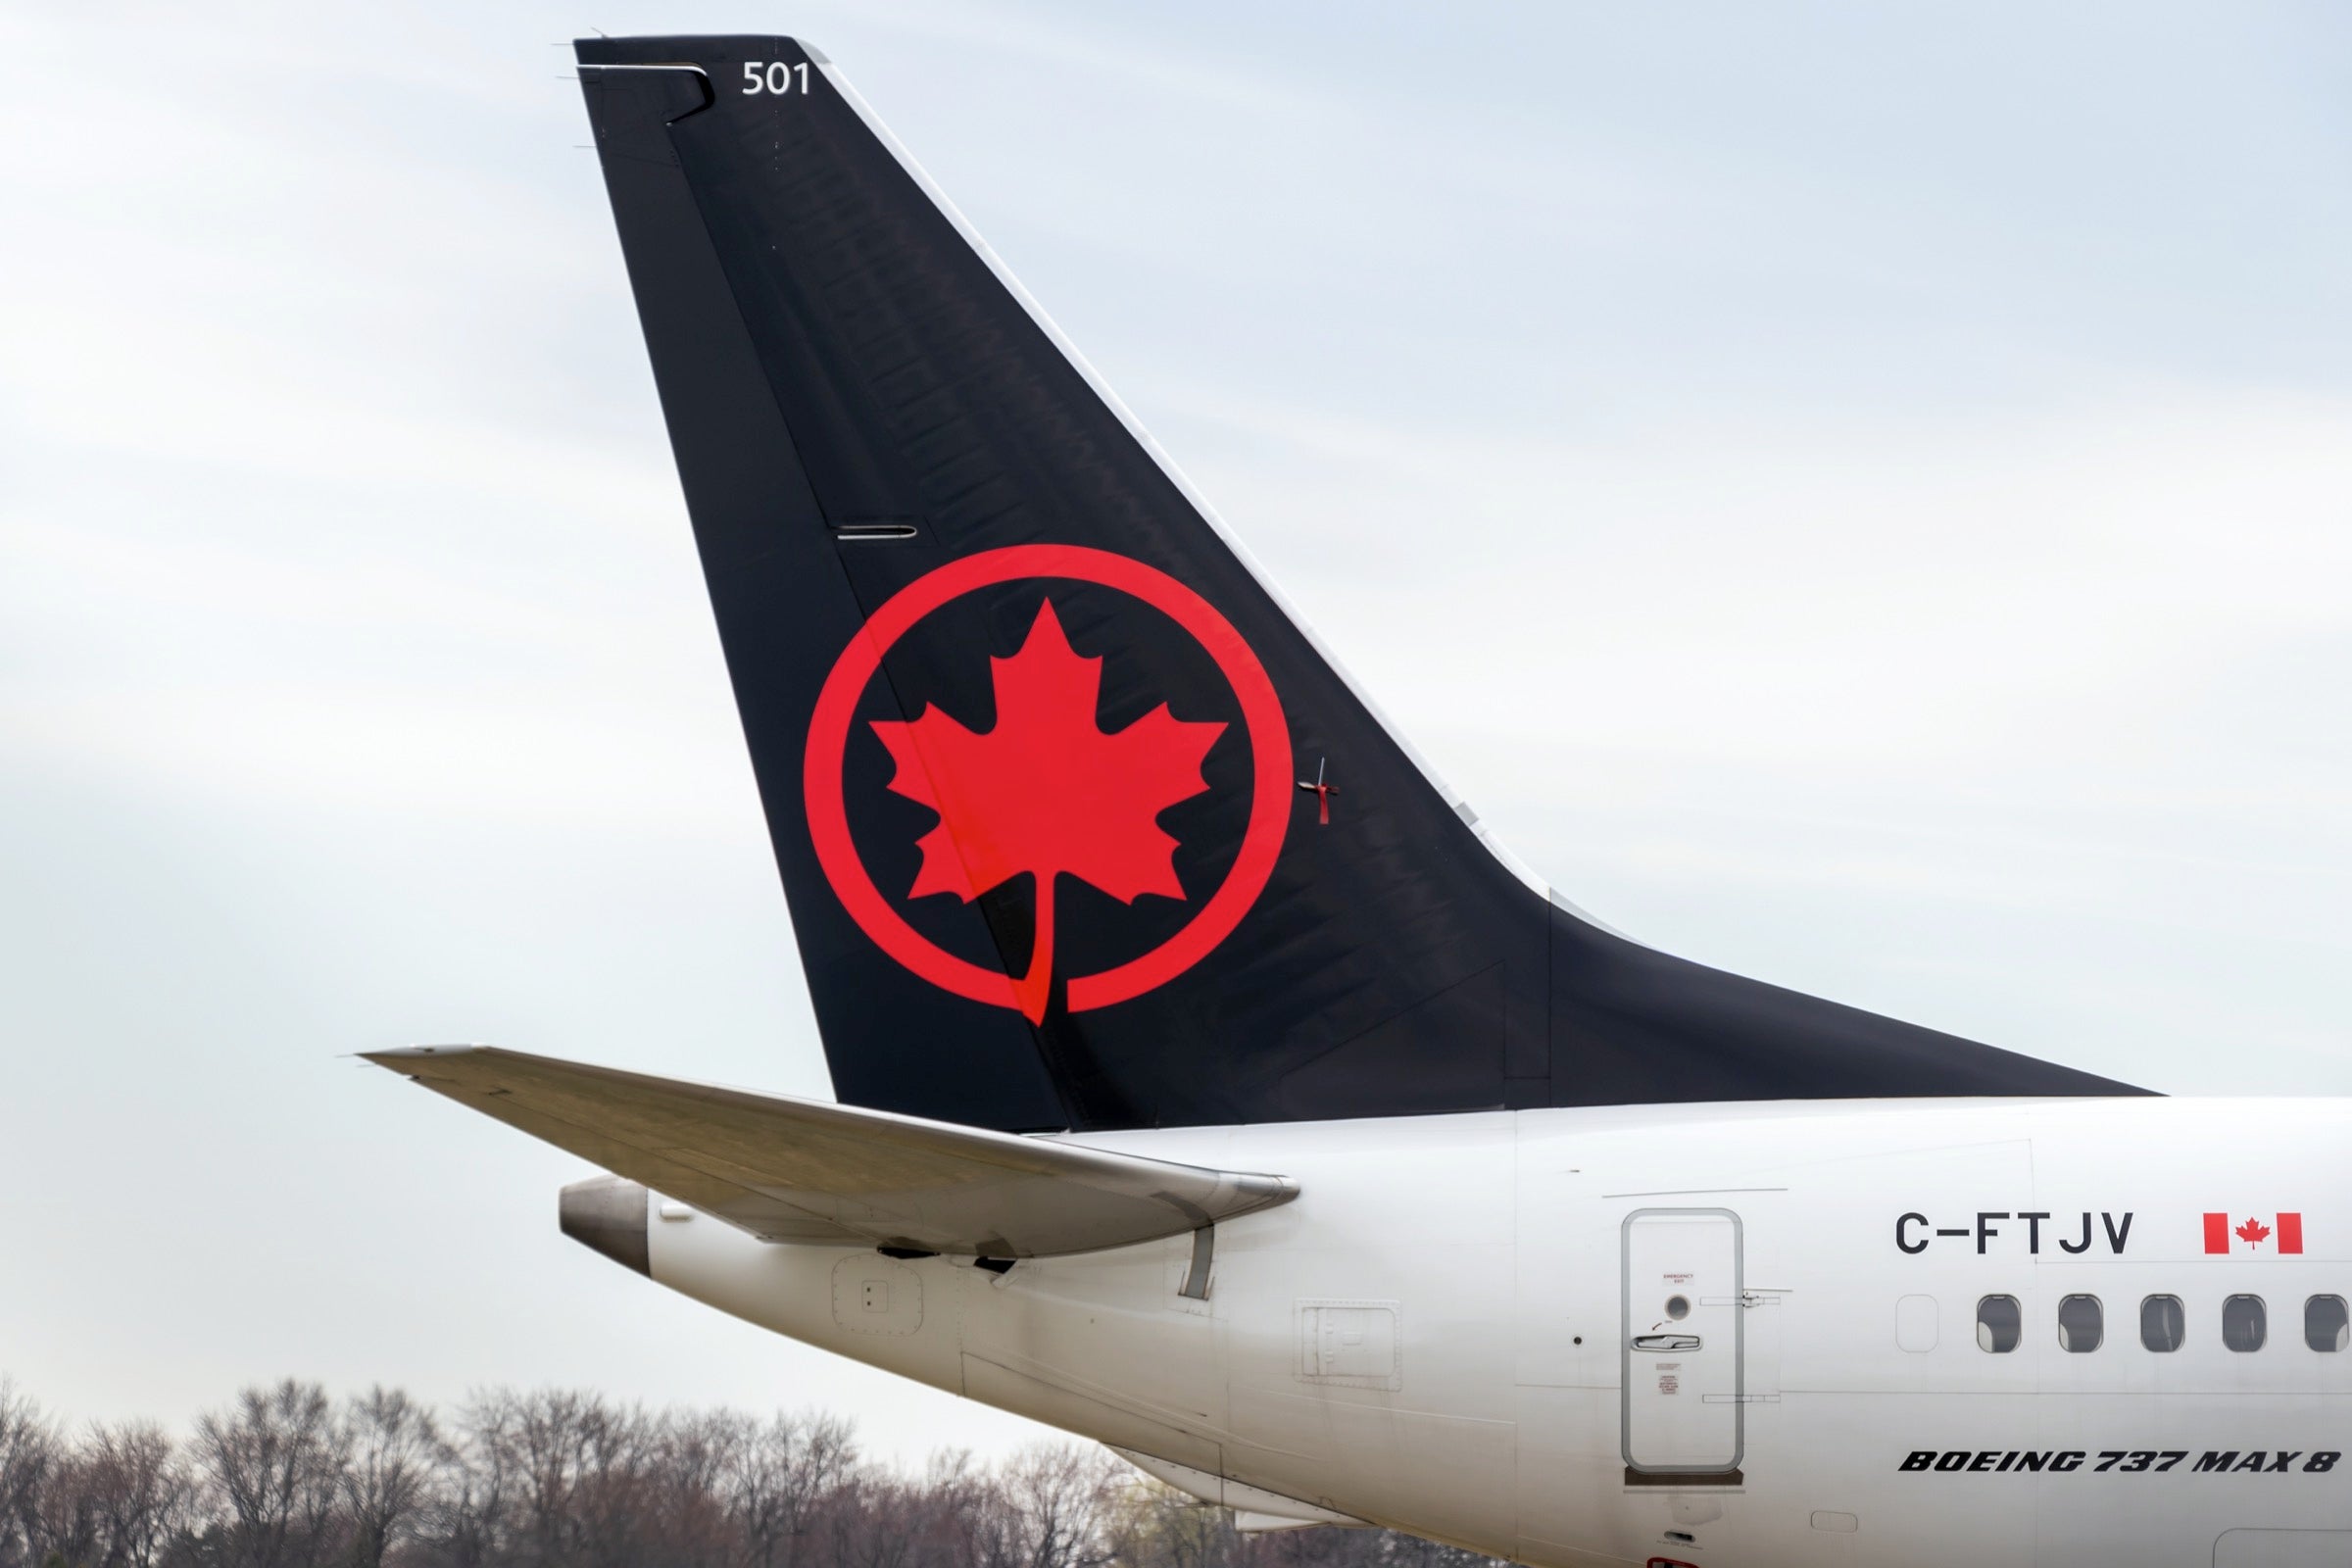 Flying in Canada? You’ll have to be fully vaccinated even if you’re traveling domestically